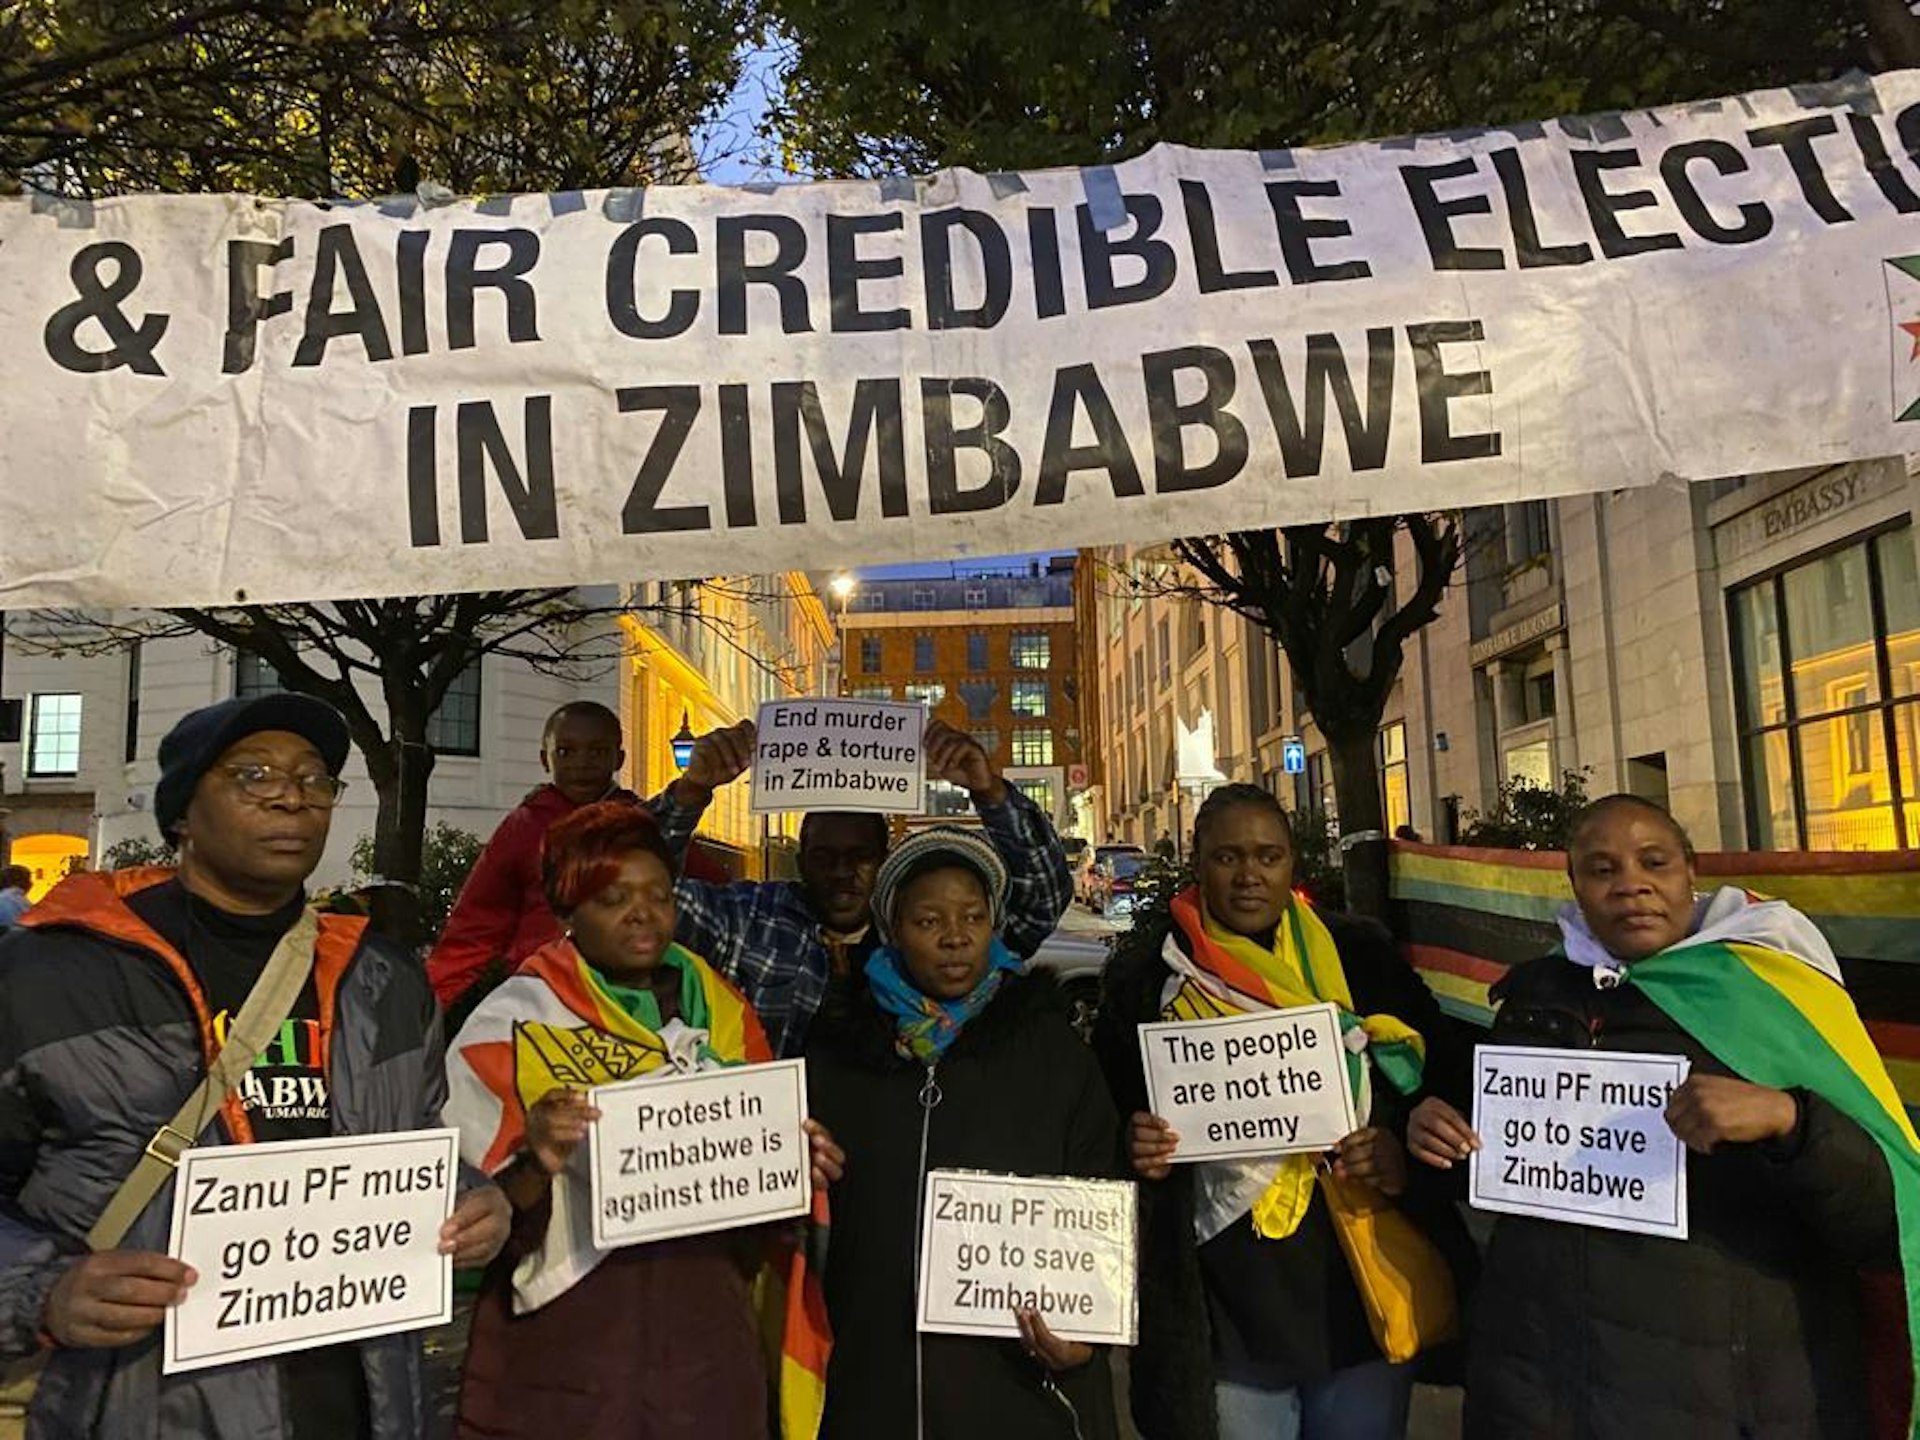 Zimbabwe’s diaspora is continuing to fight for freedom